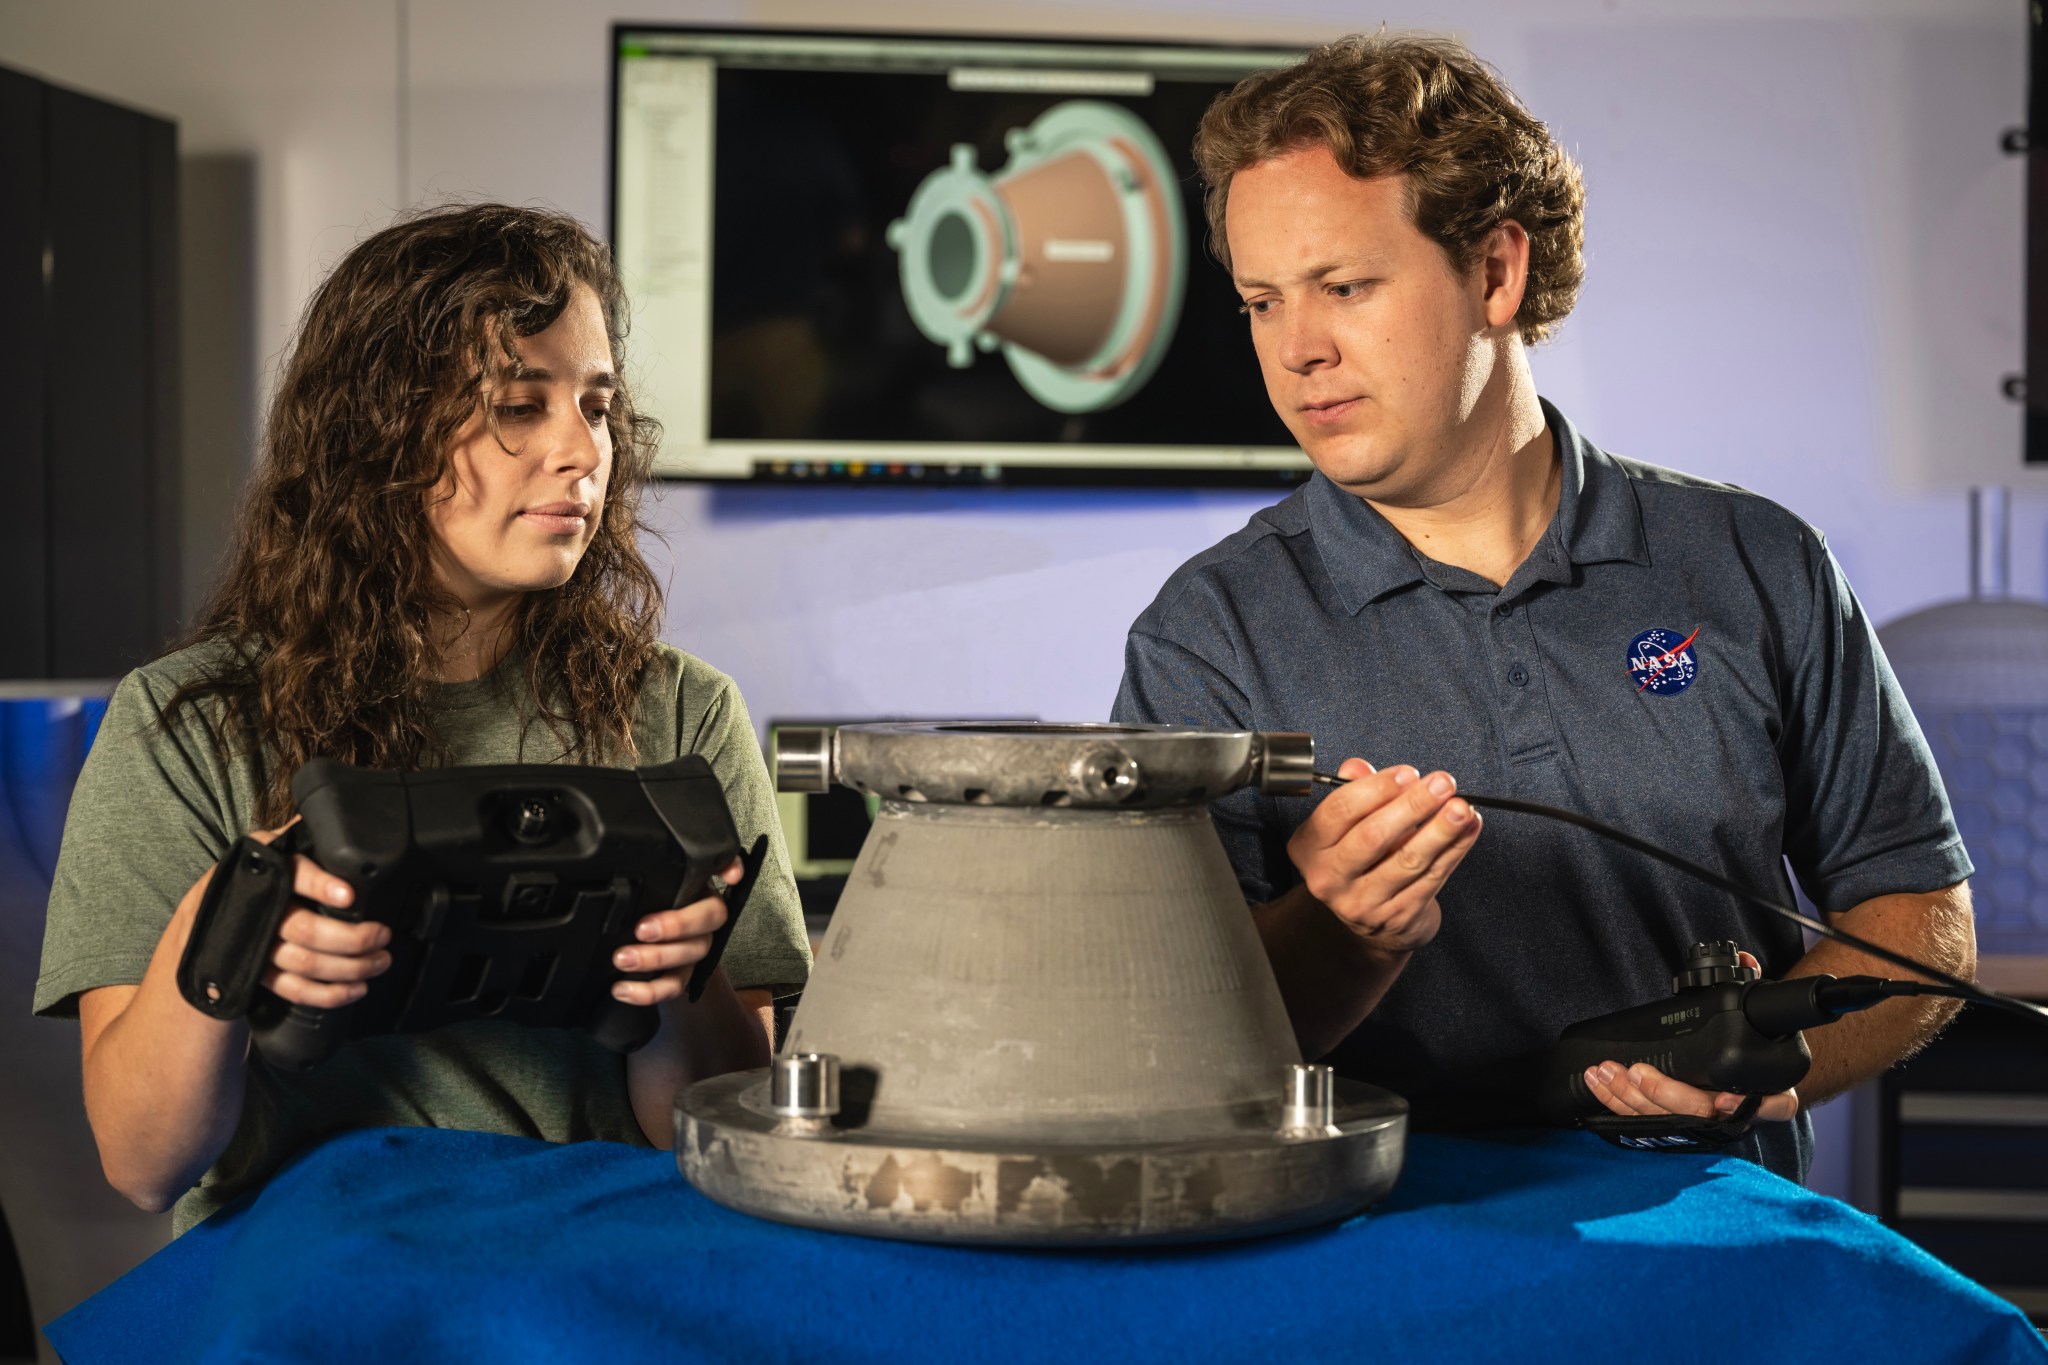 A female engineer with brown curly hair and a male engineer with short brown hair look at a nozzle on a table that has been through hot fire testing.